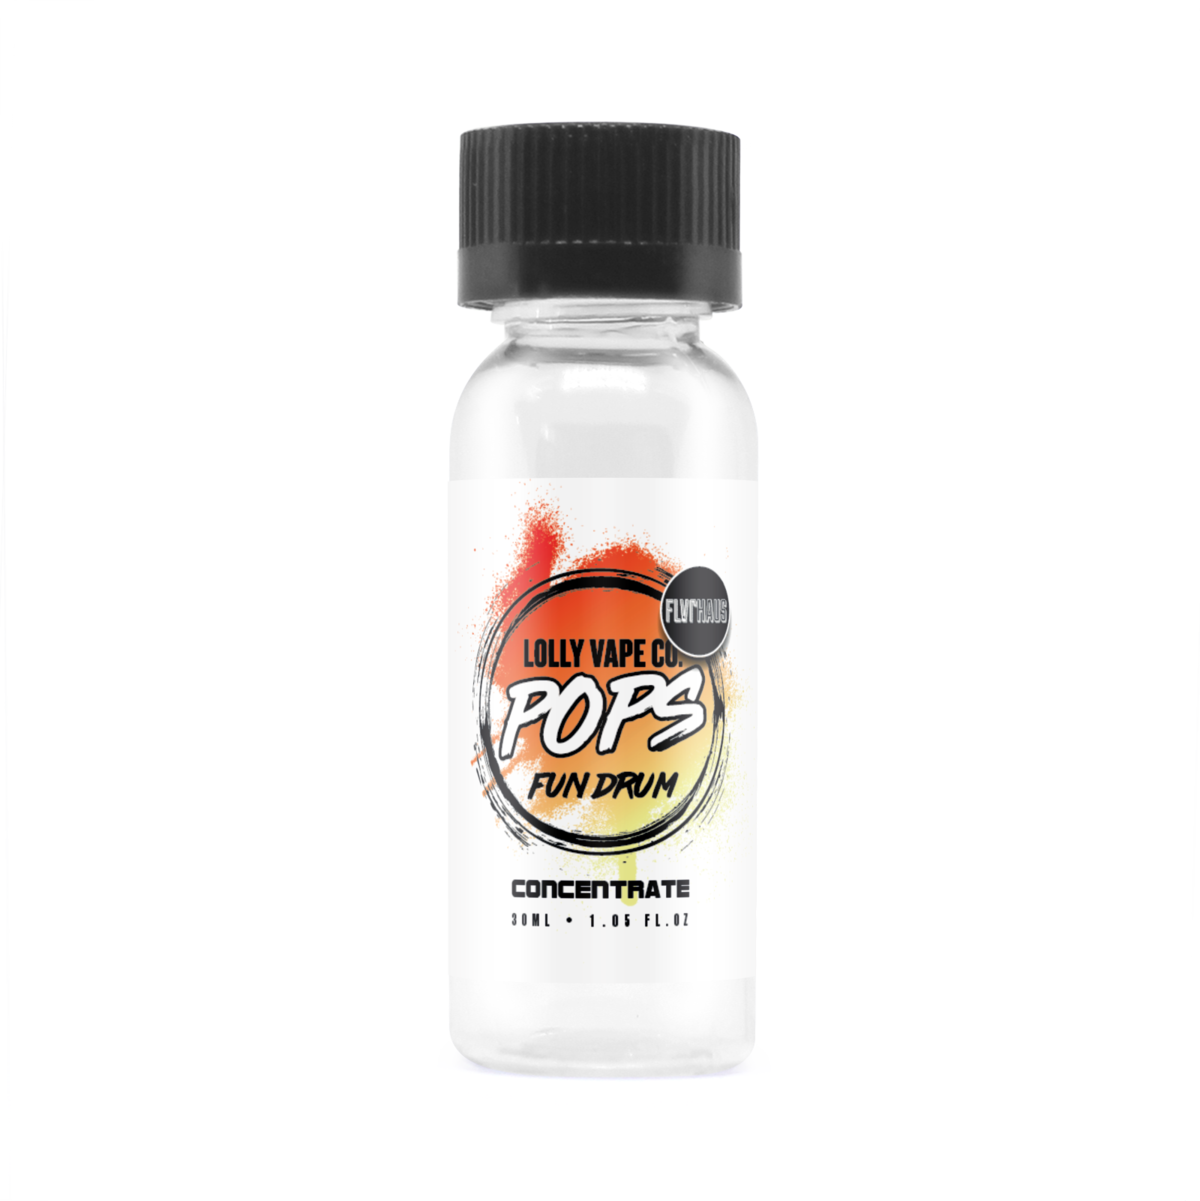 Fundrum Concentrate E-liquid by Lolly Vape Co 30ml